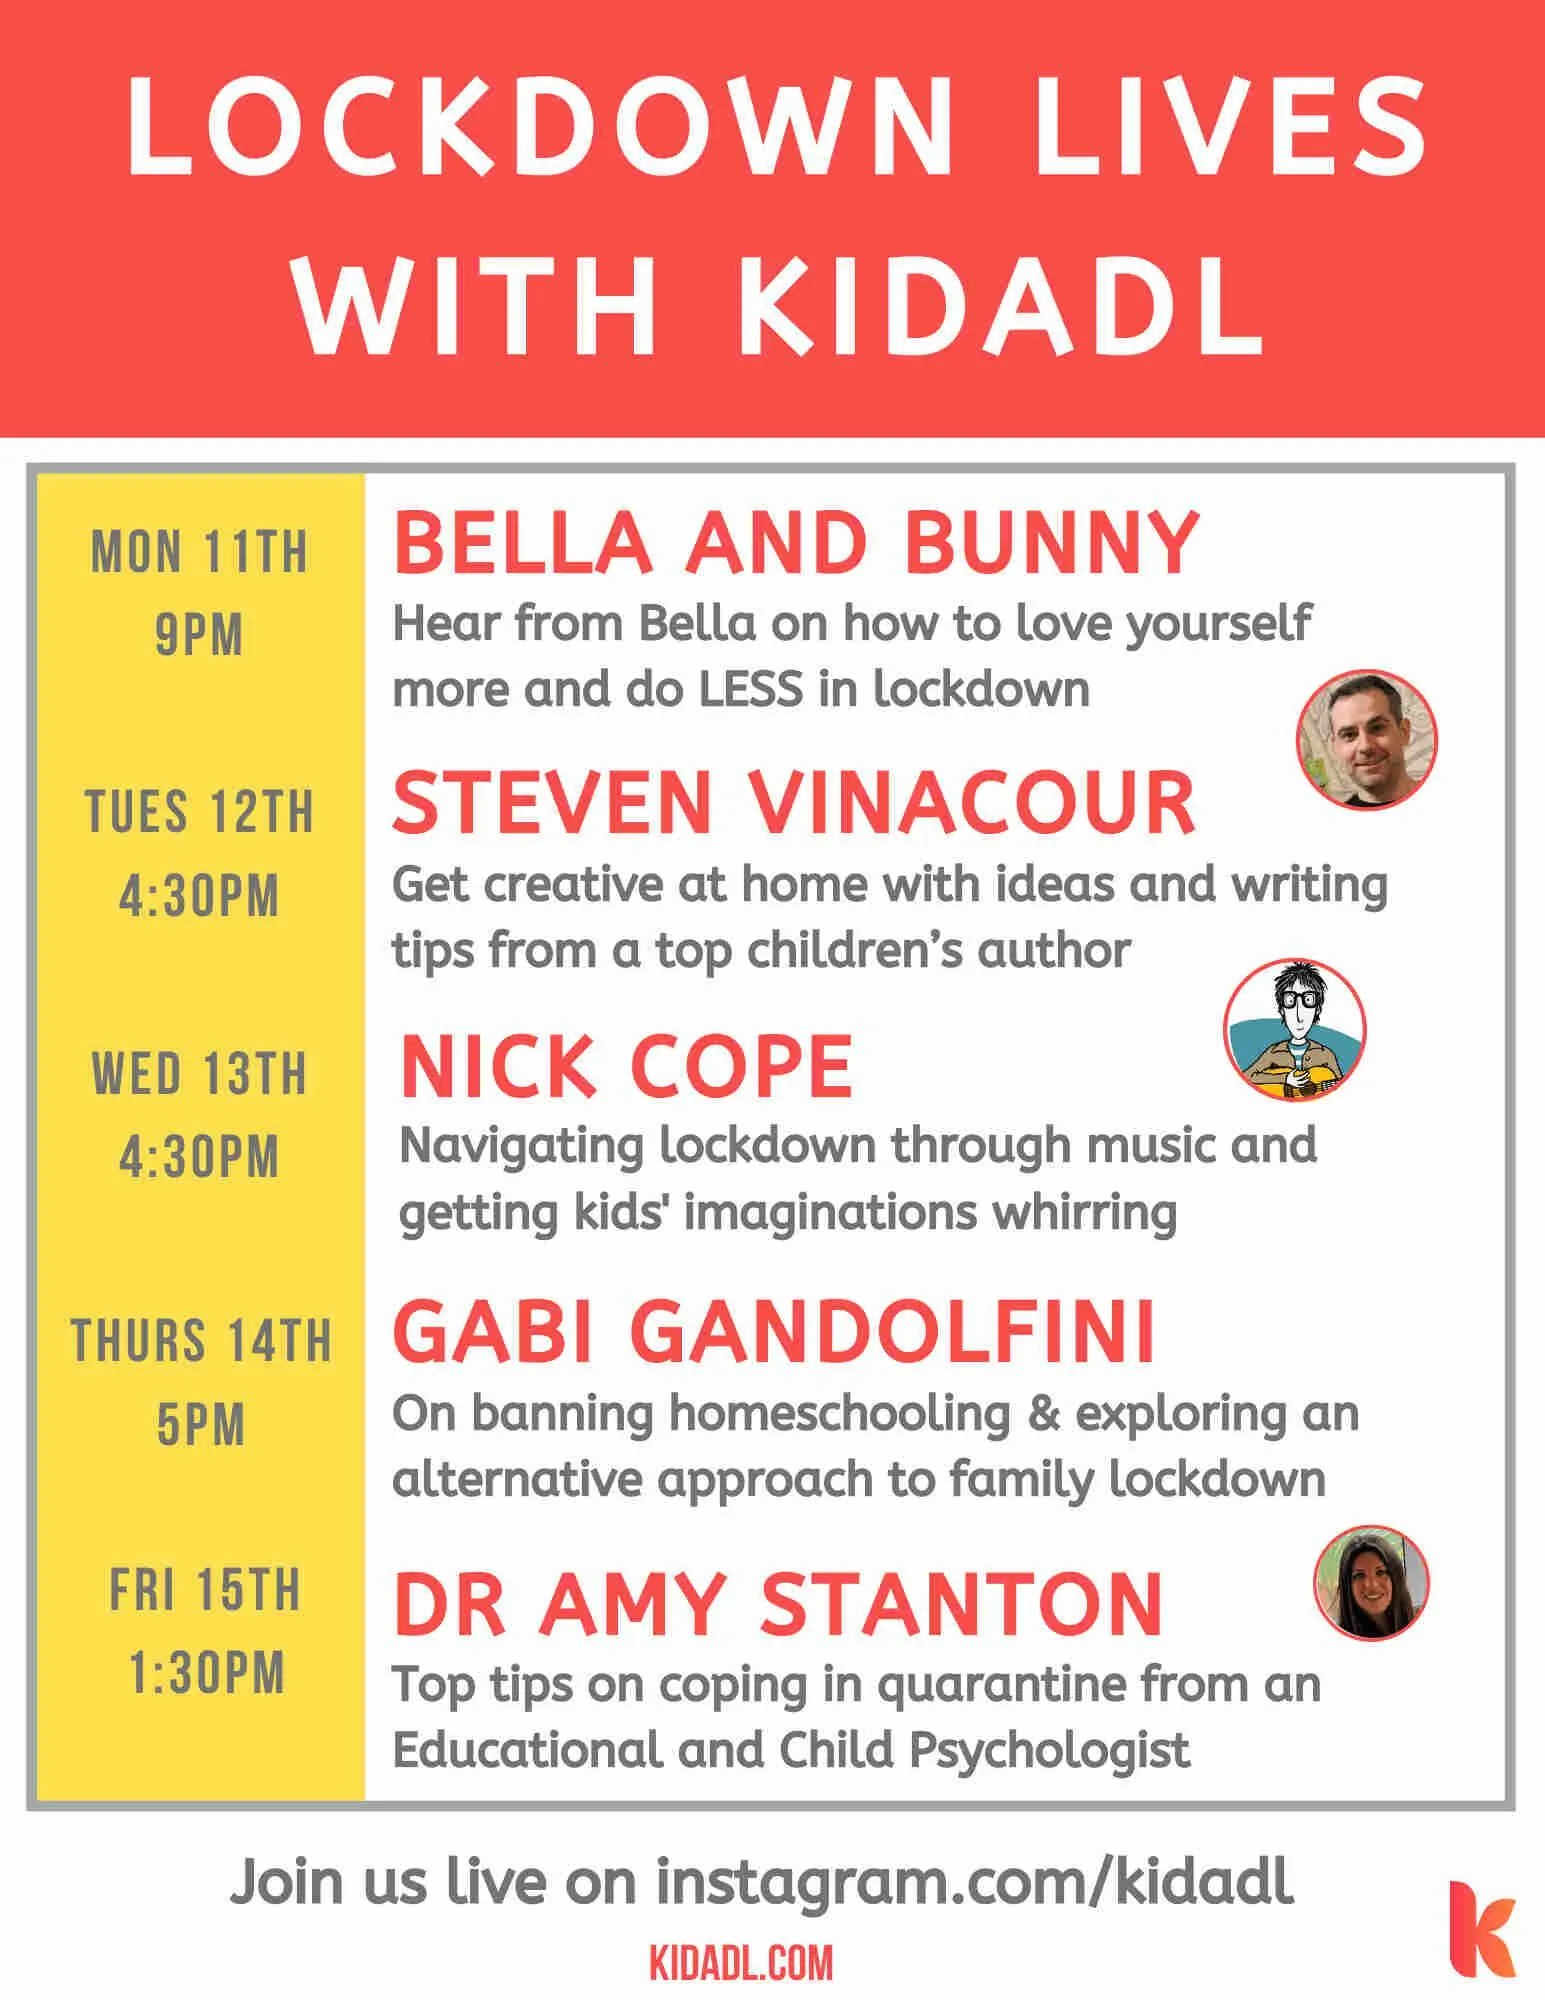 Alleviate the 7-week itch with Kidadl's series of lockdown live streams.